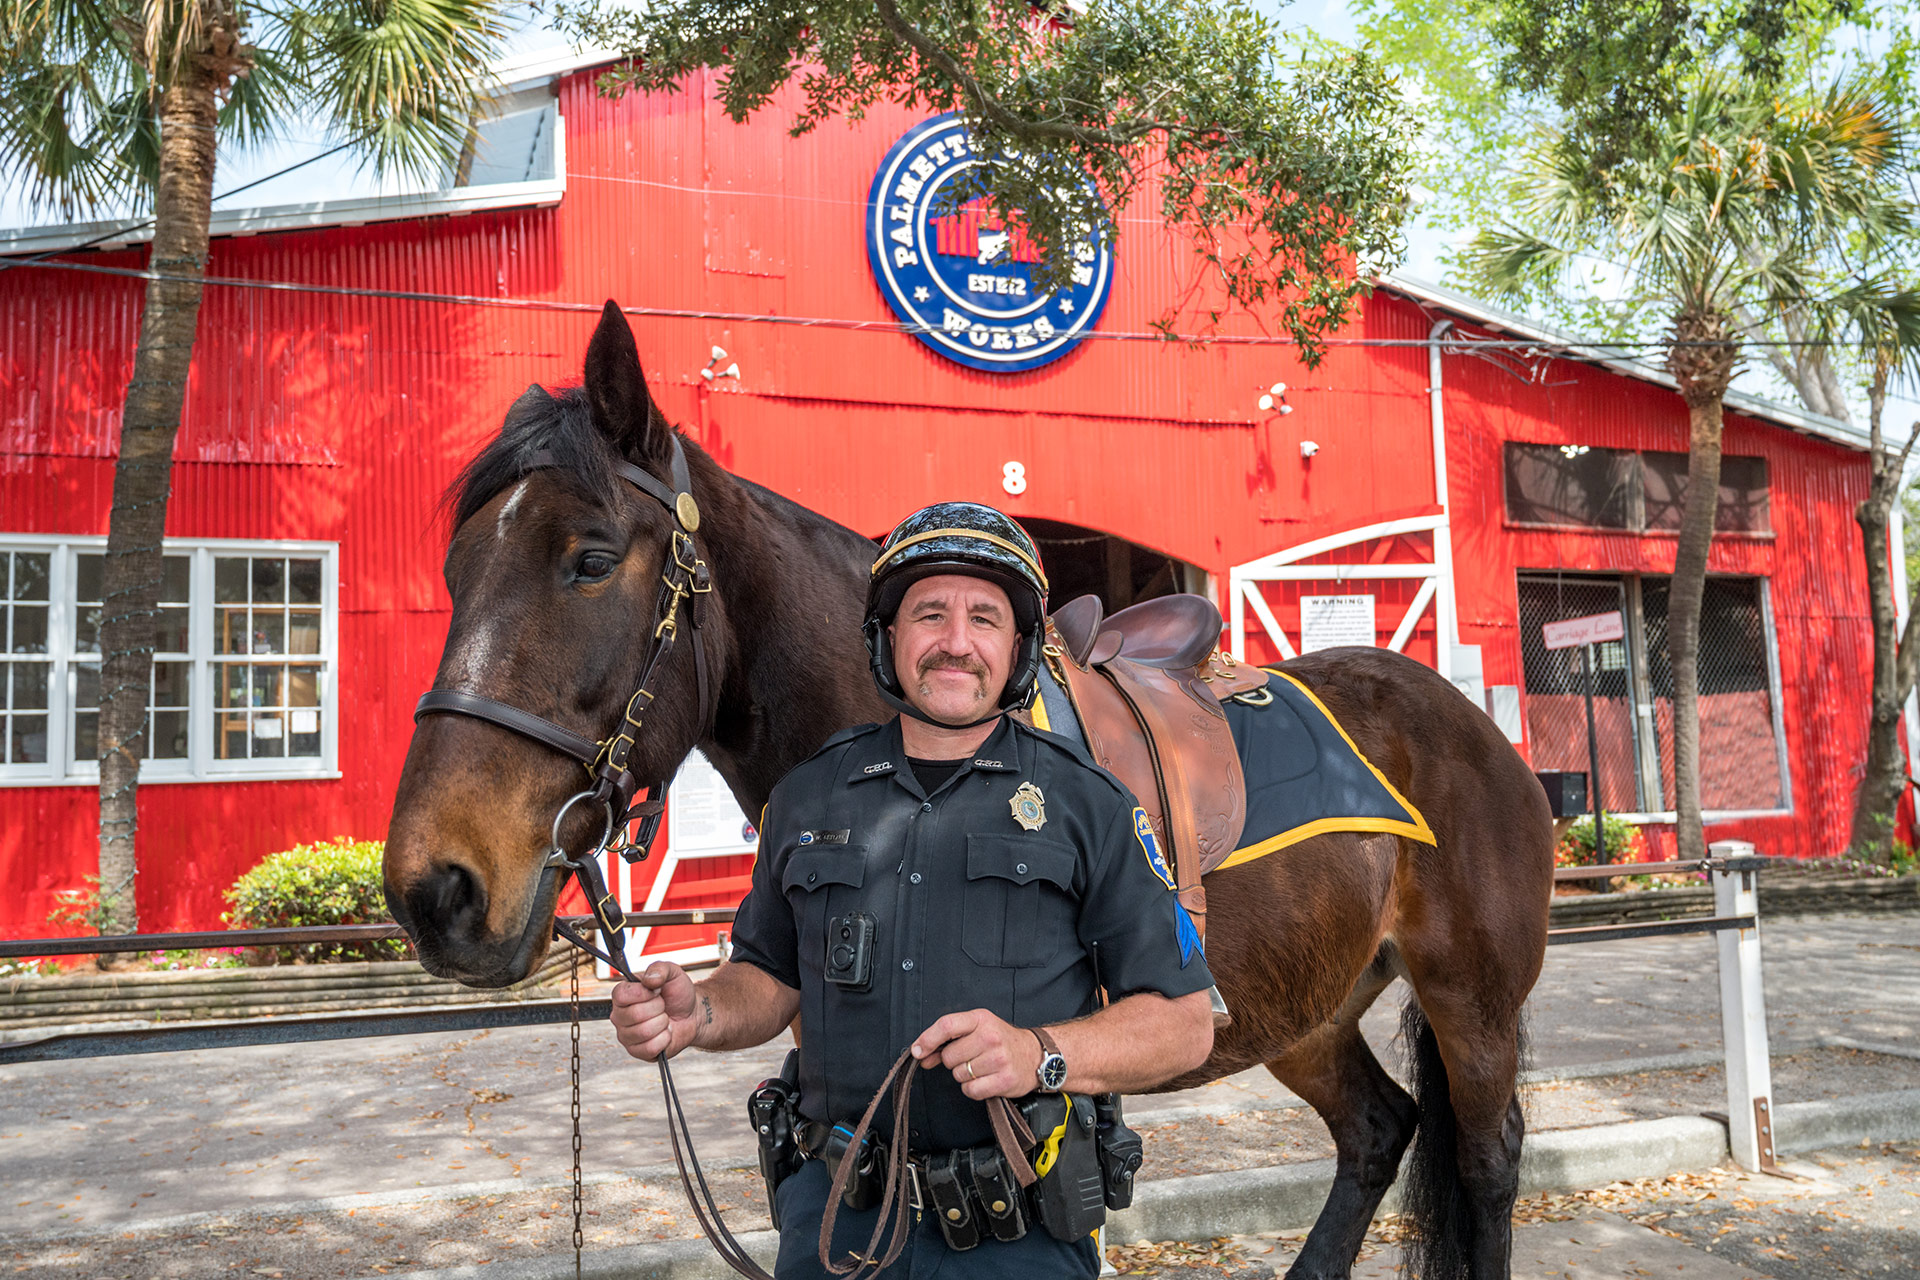 after-10-years-mounted-patrol-returns-to-charleston-3-sergeant-w-gritzuk-with-hispatrol-horse-watson